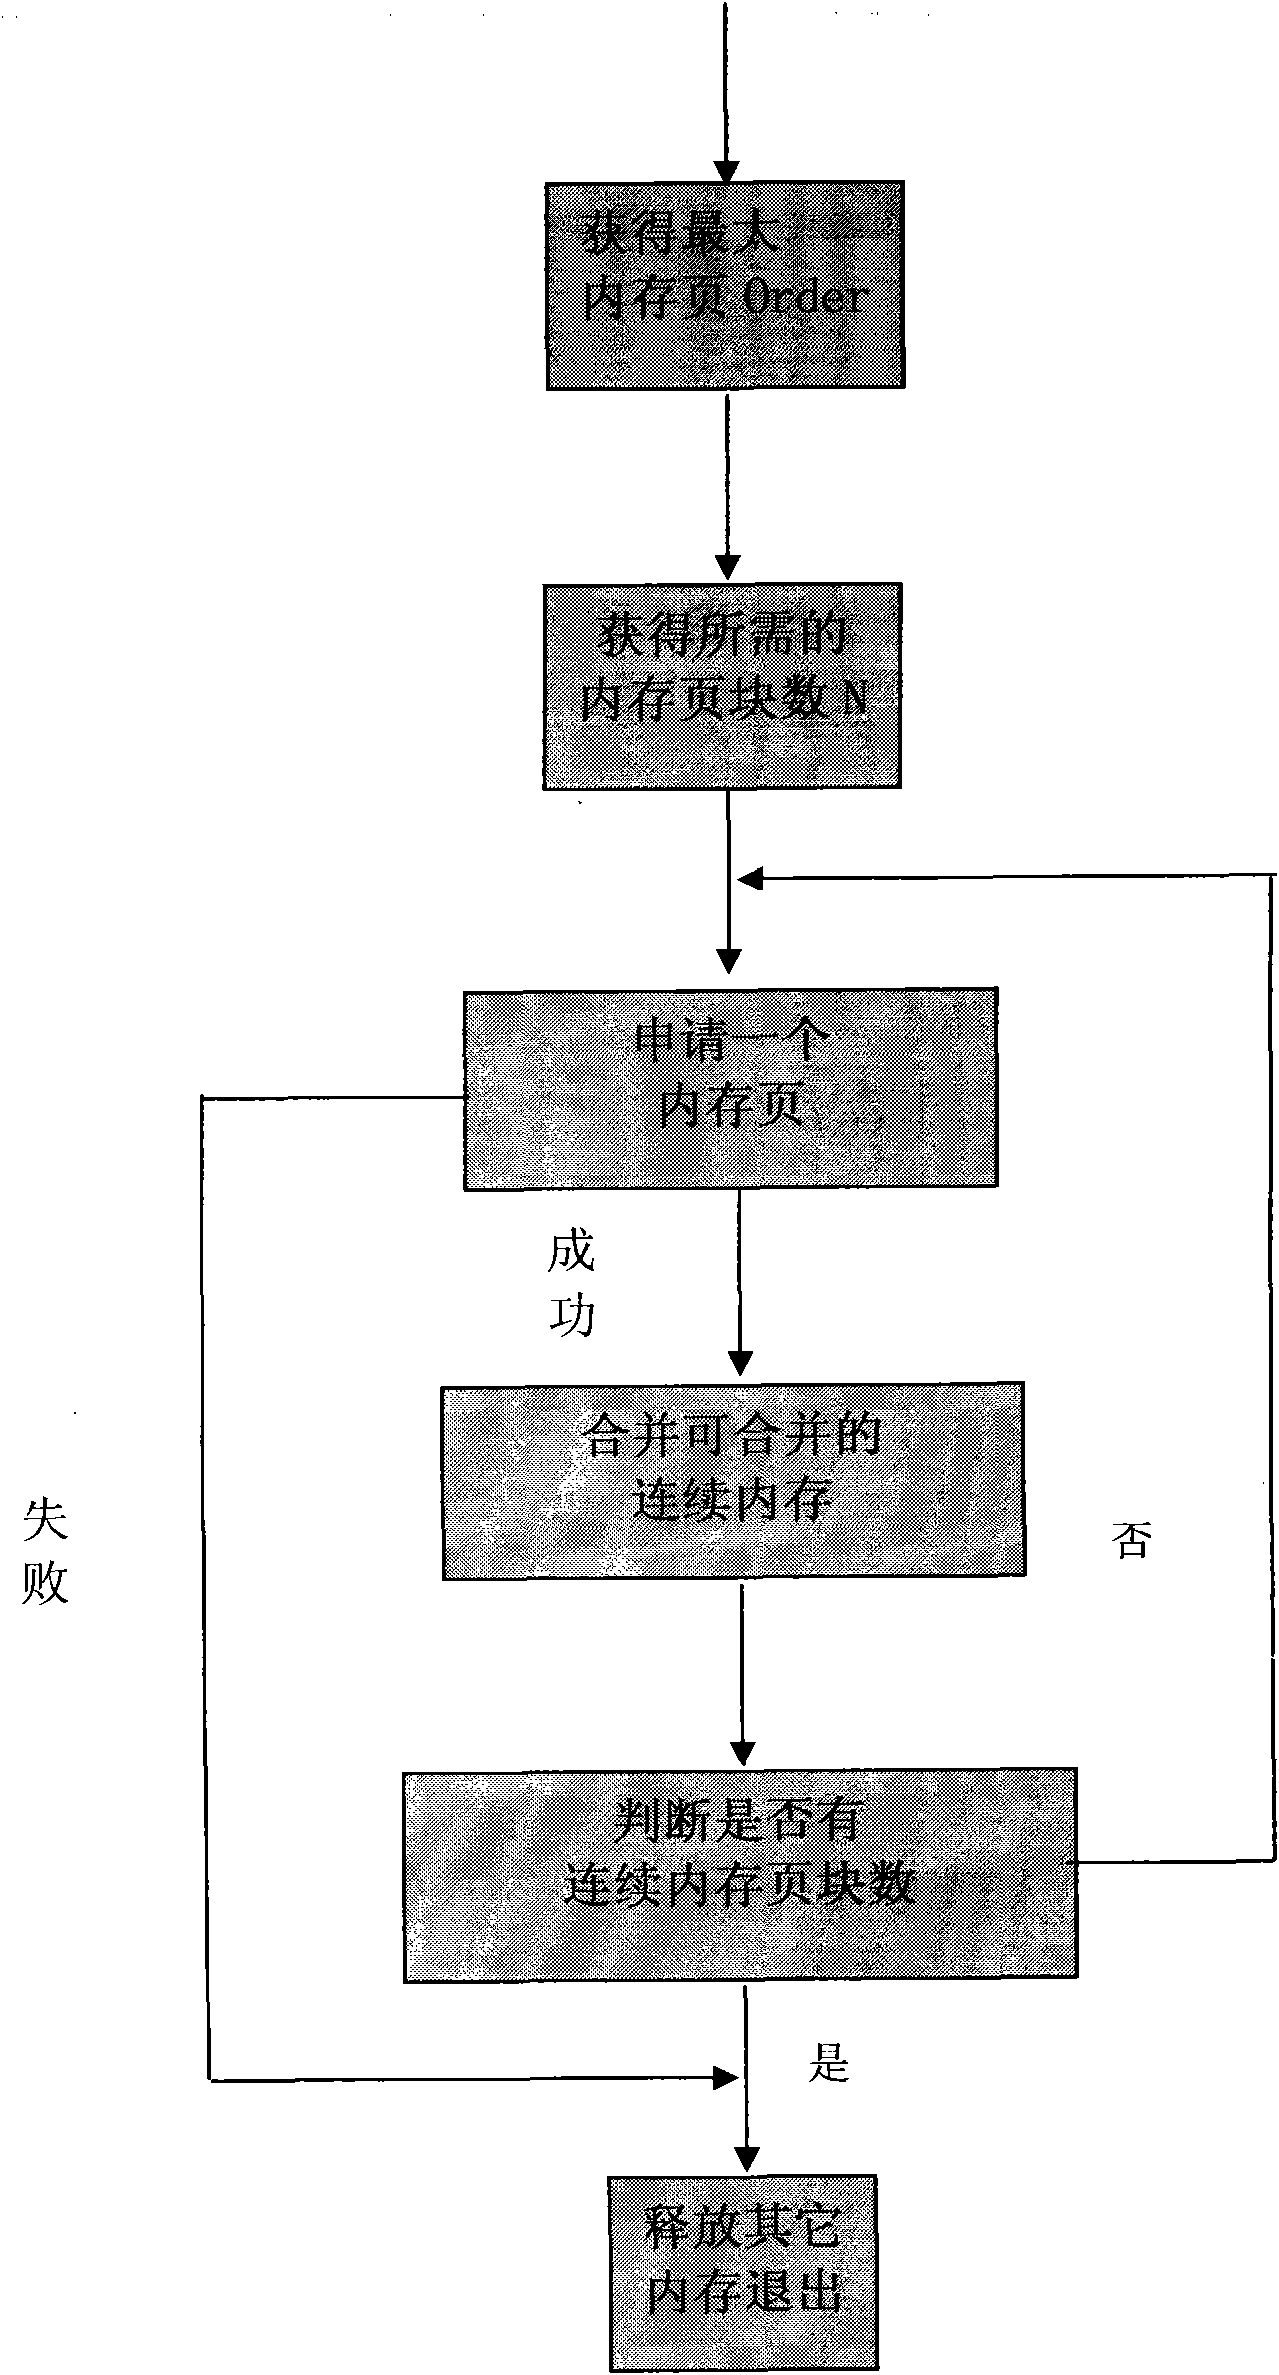 Method for distributing large continuous memory of kernel